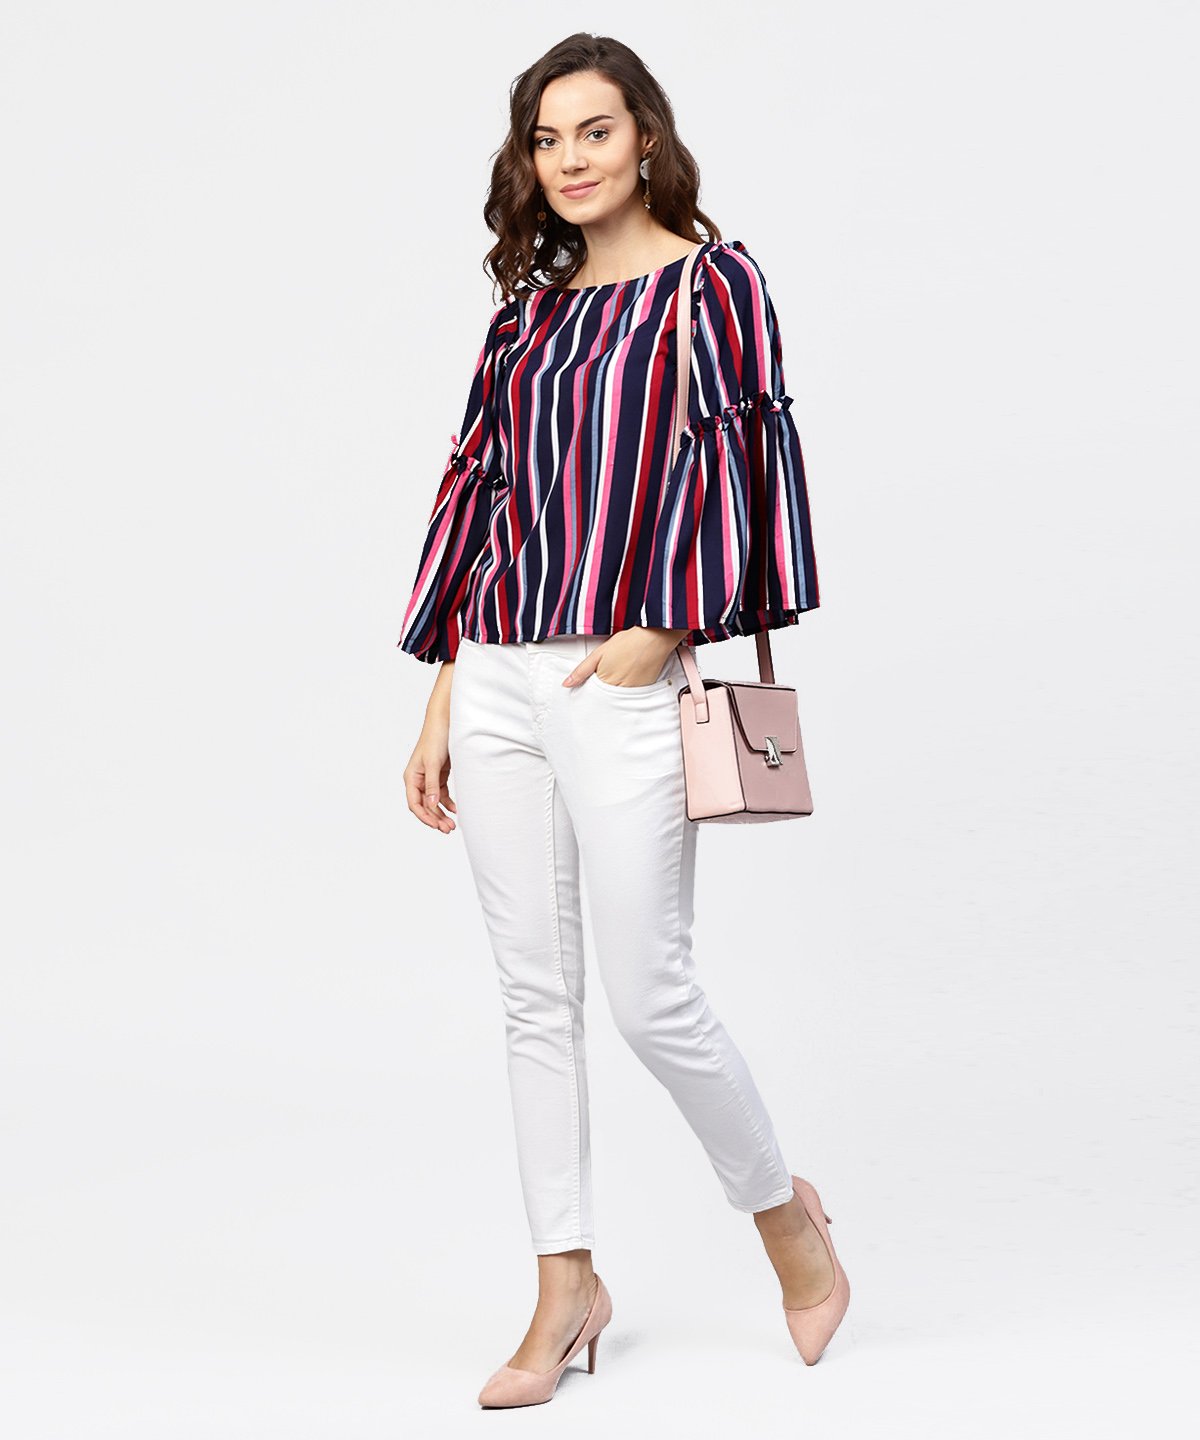 Women's Striped Multi Printed Flared Sleeves Crepe Top - Nayo Clothing